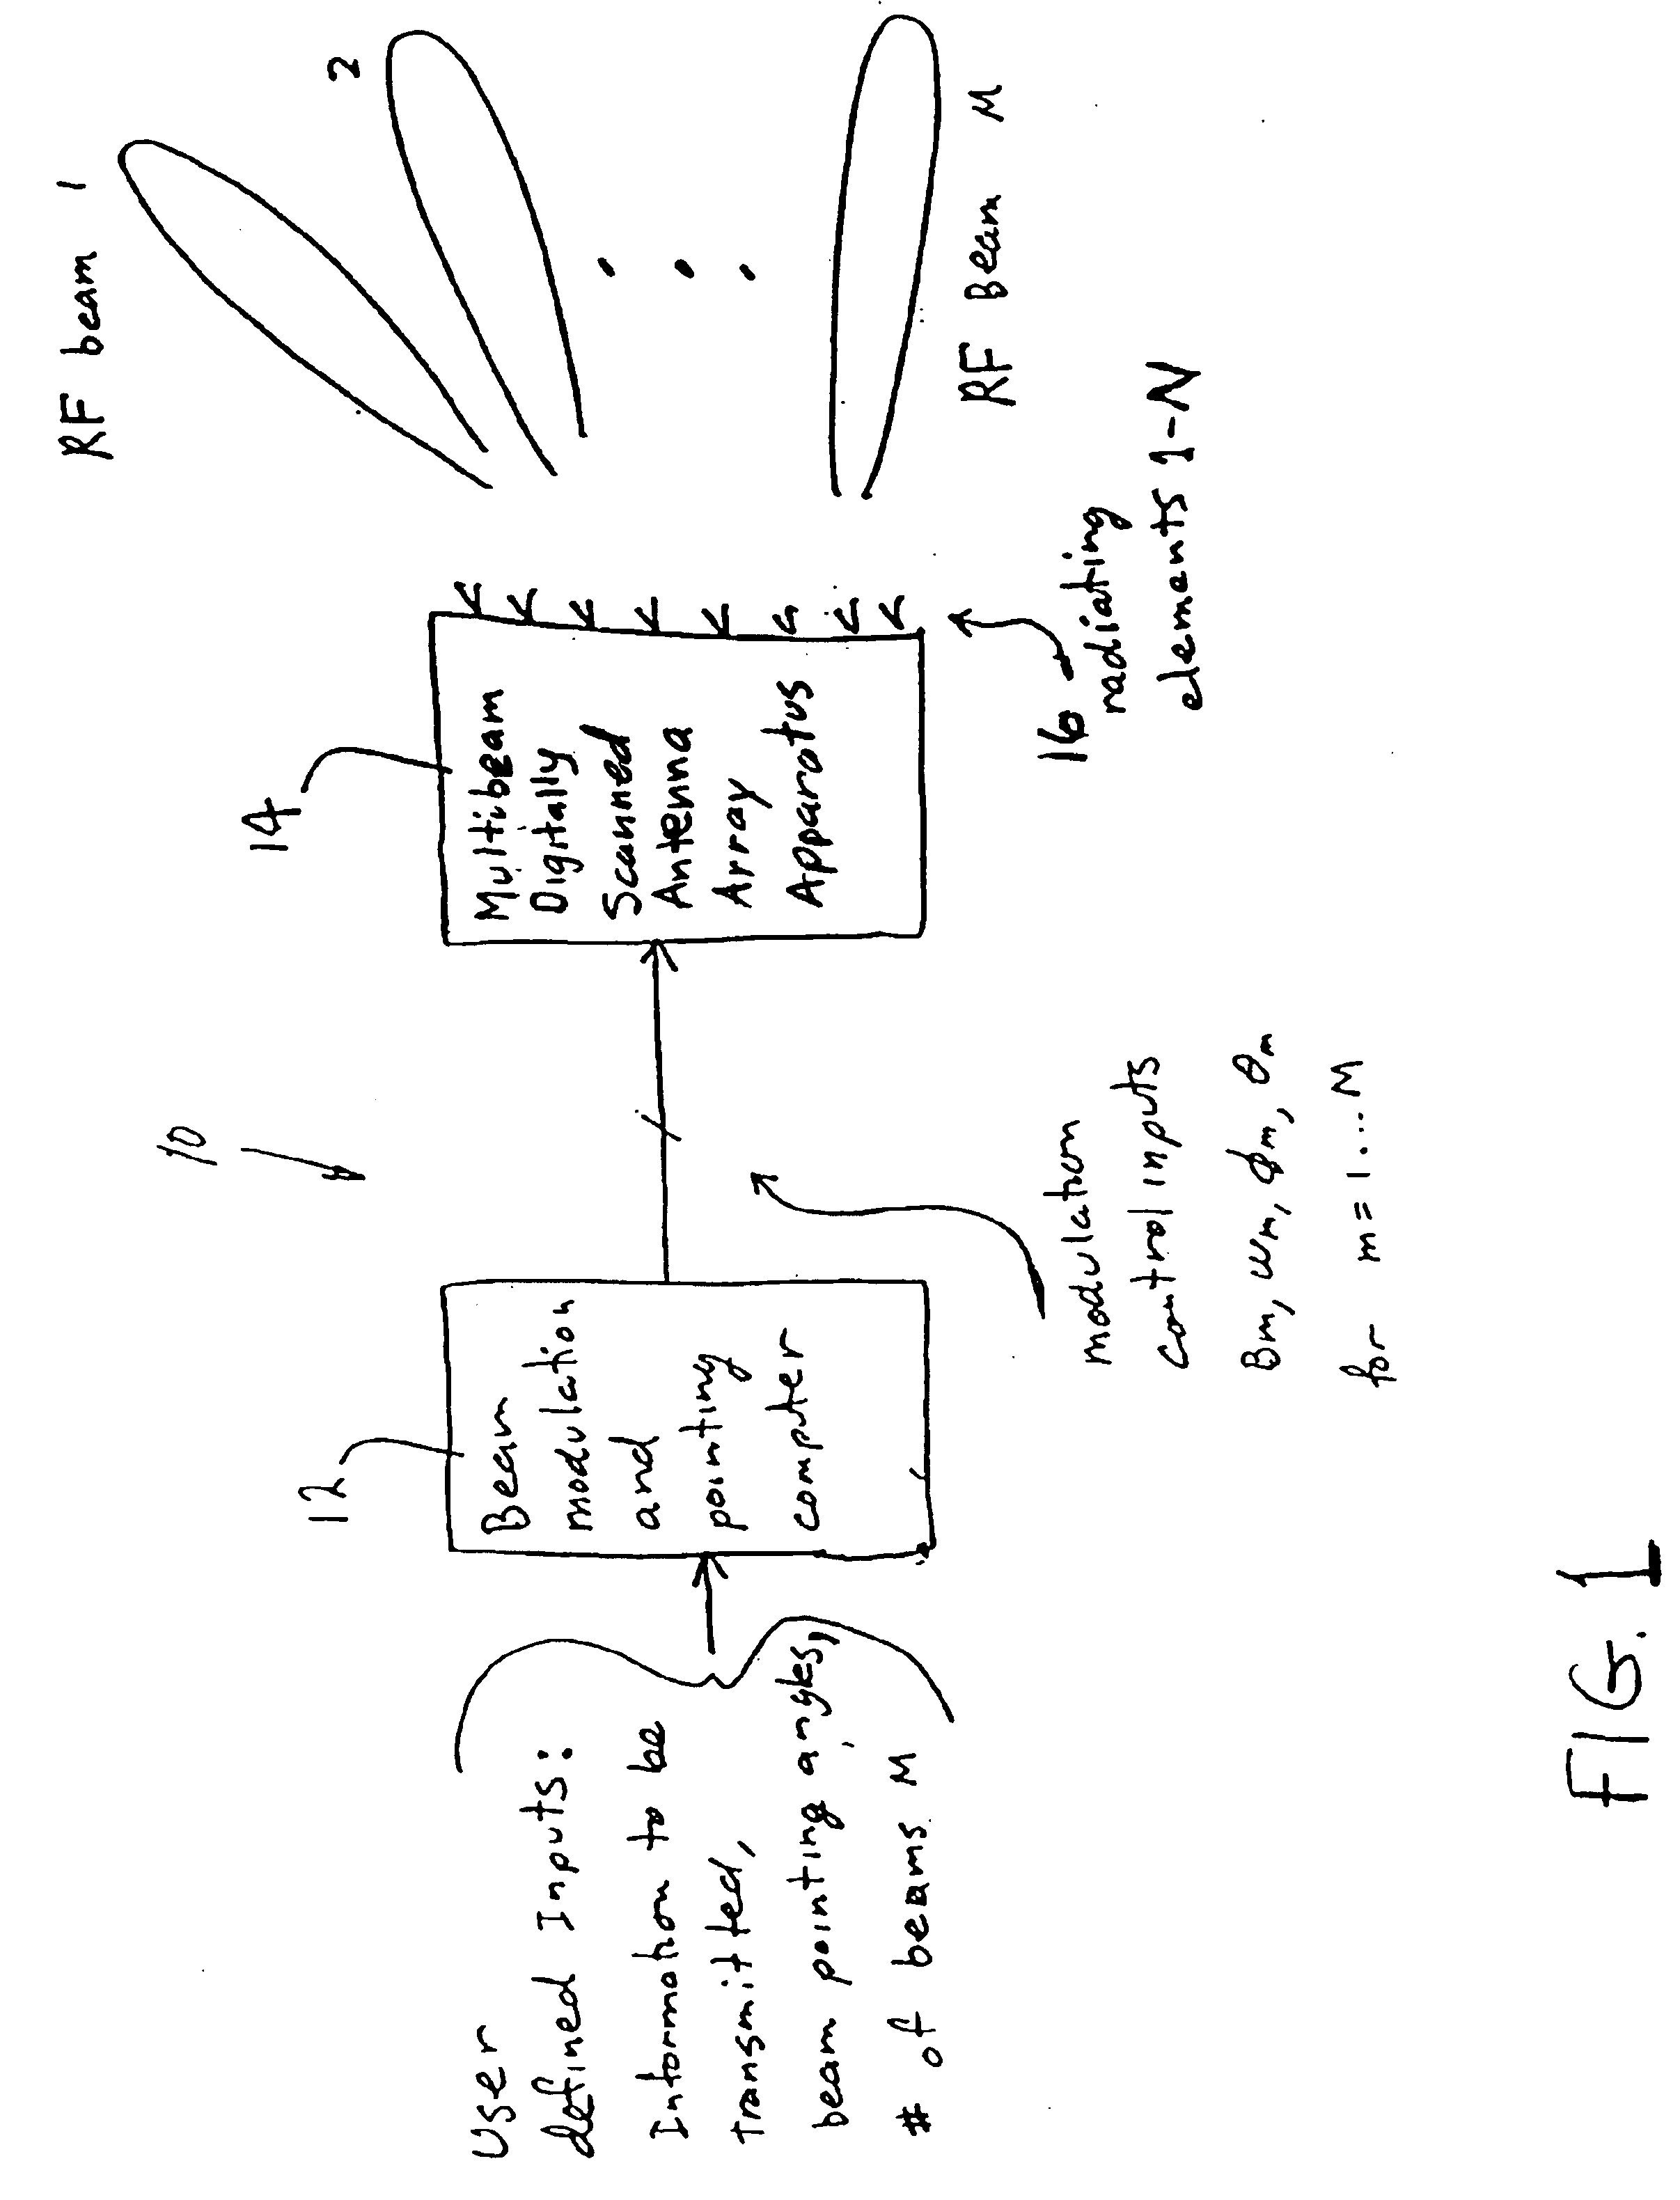 Apparatus for and method of forming multiple simultaneous electronically scanned beams using direct digital synthesis